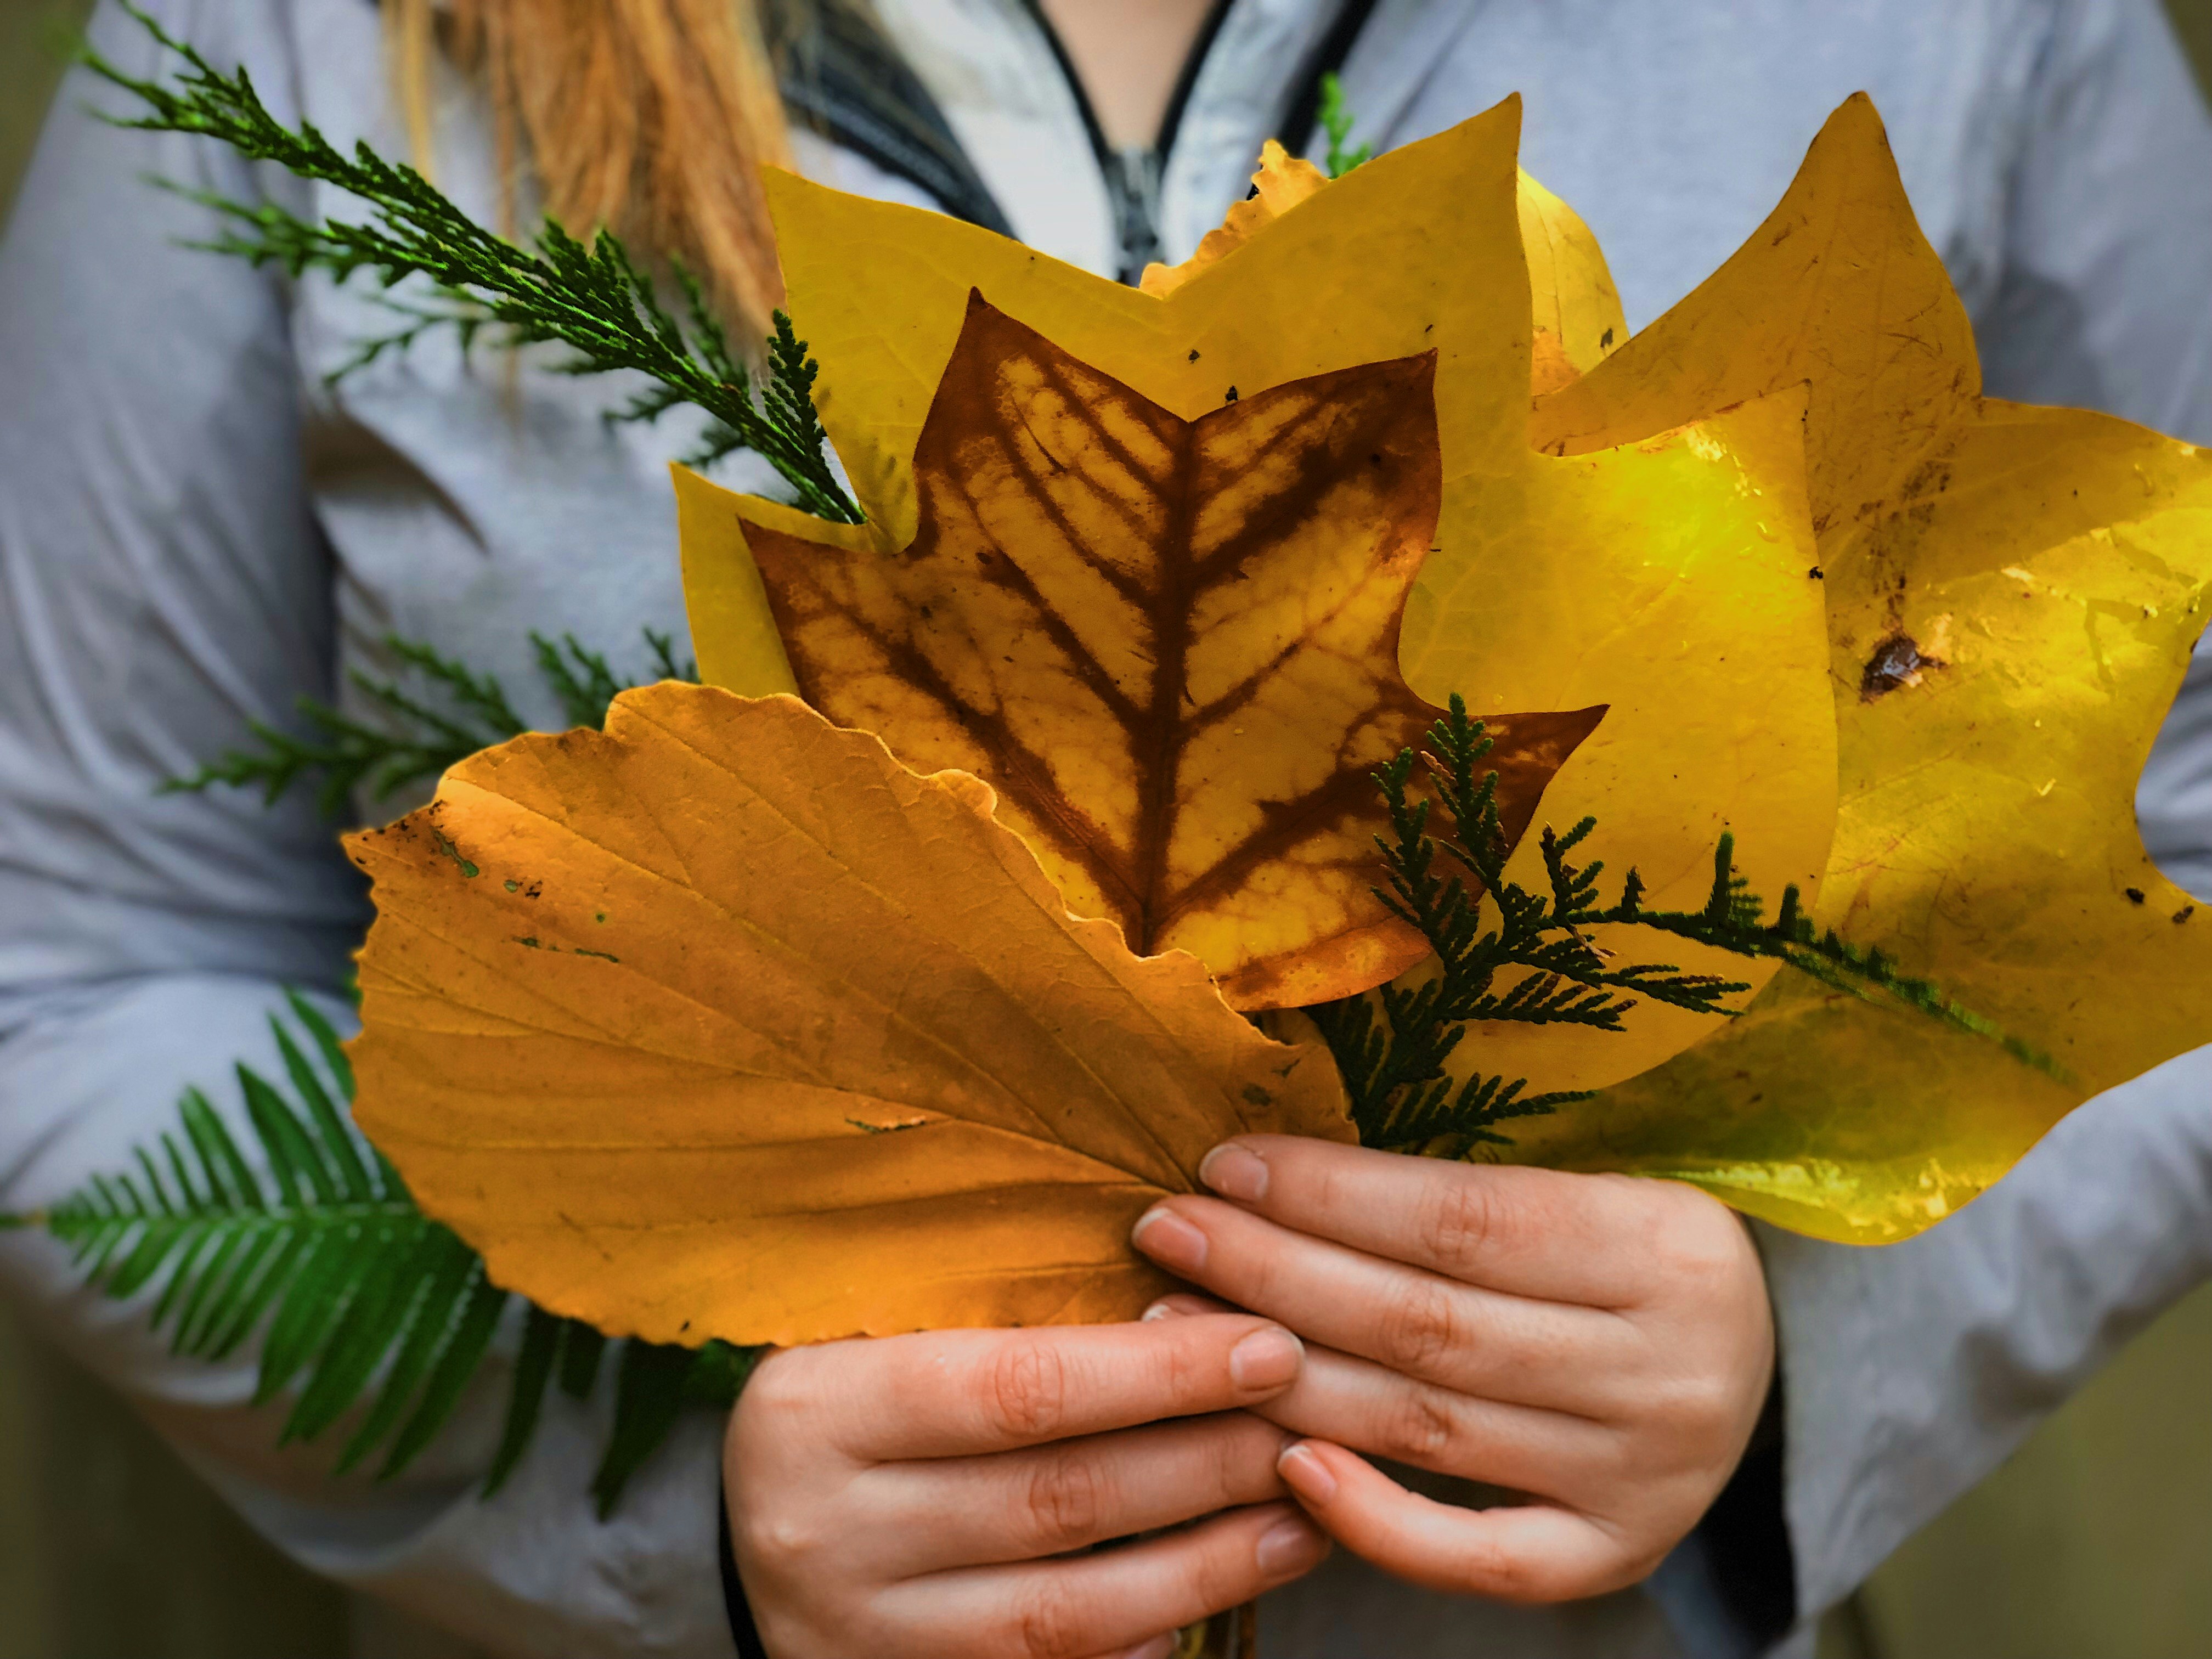 As we hiked we gathered fall leaves in all different shapes and bright yellow and brown colors to make into a beautiful fall bouquet. I love how different each leaf can be and what they are when they come together. Nature is such an incredible gift to us. I shot this one a little tighter to feature the hands that collected the fall leaves. Friendship and fall!